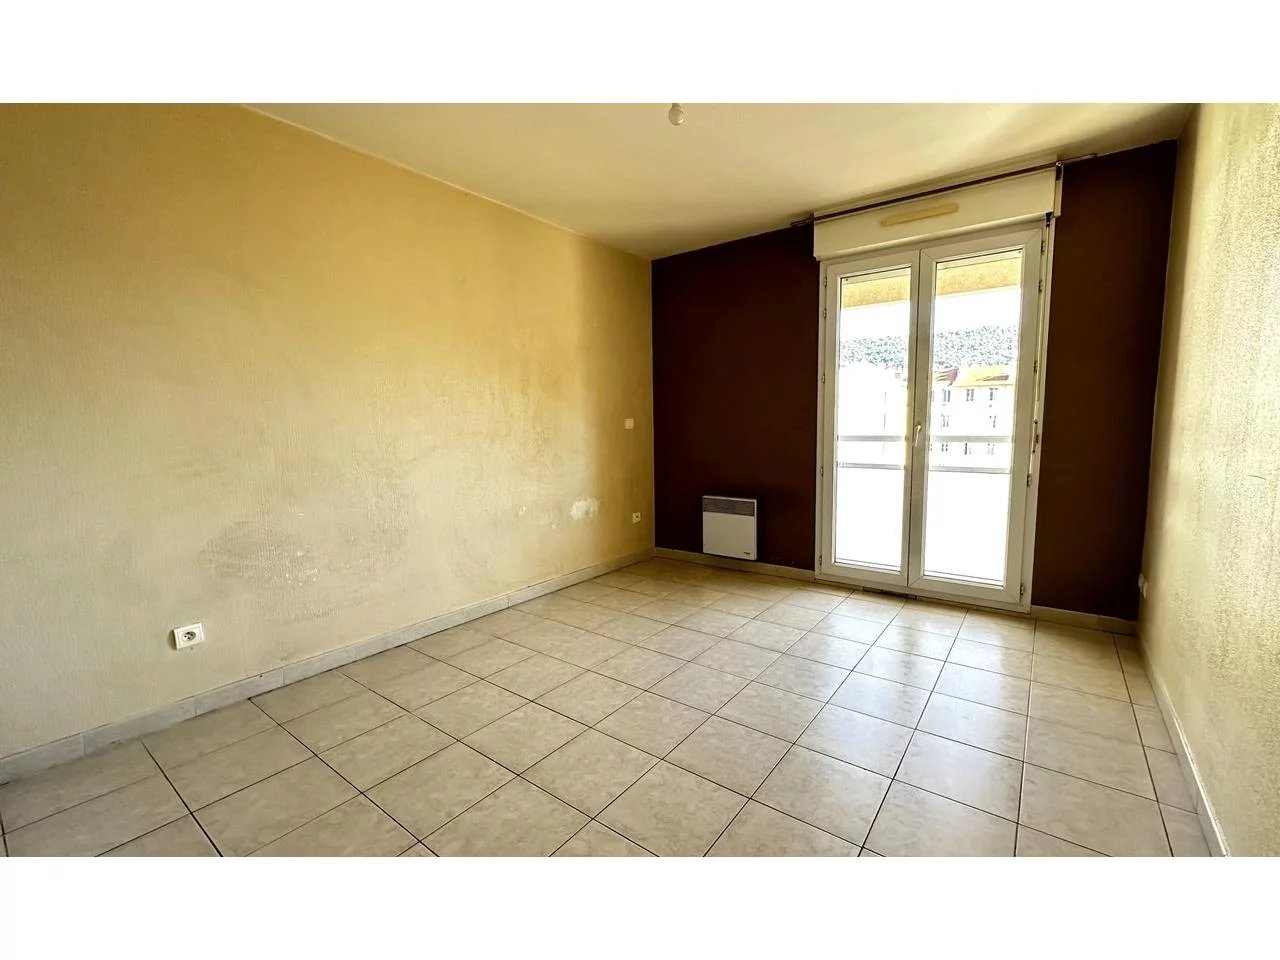 Appartement  3 Rooms 70m2  for sale   395 000 €